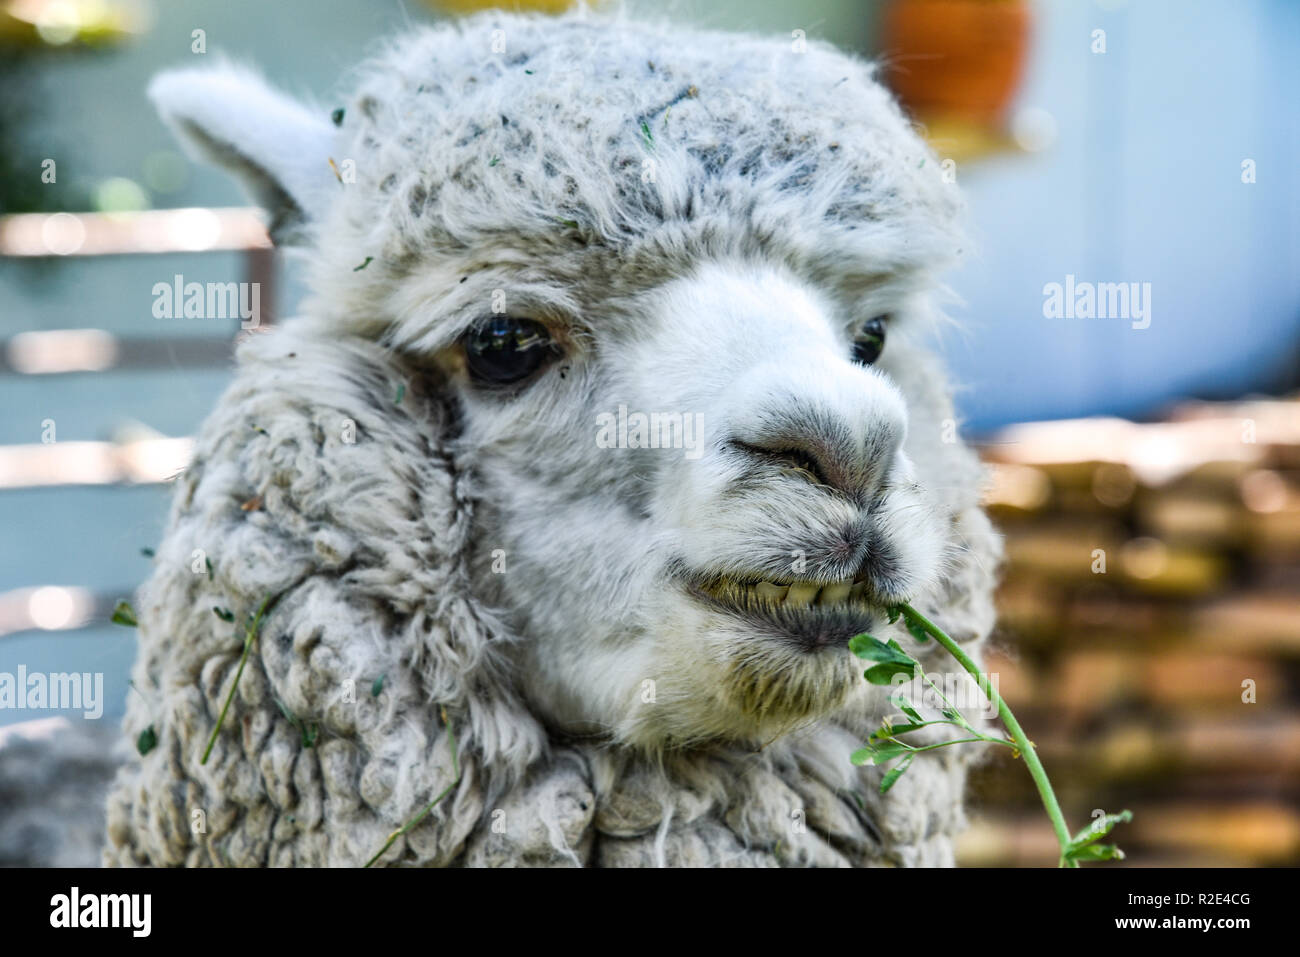 Arequipa, Peru - October 7, 2018: a grey Alpaca chews grass on a ranch in the Peruvian Andes Stock Photo